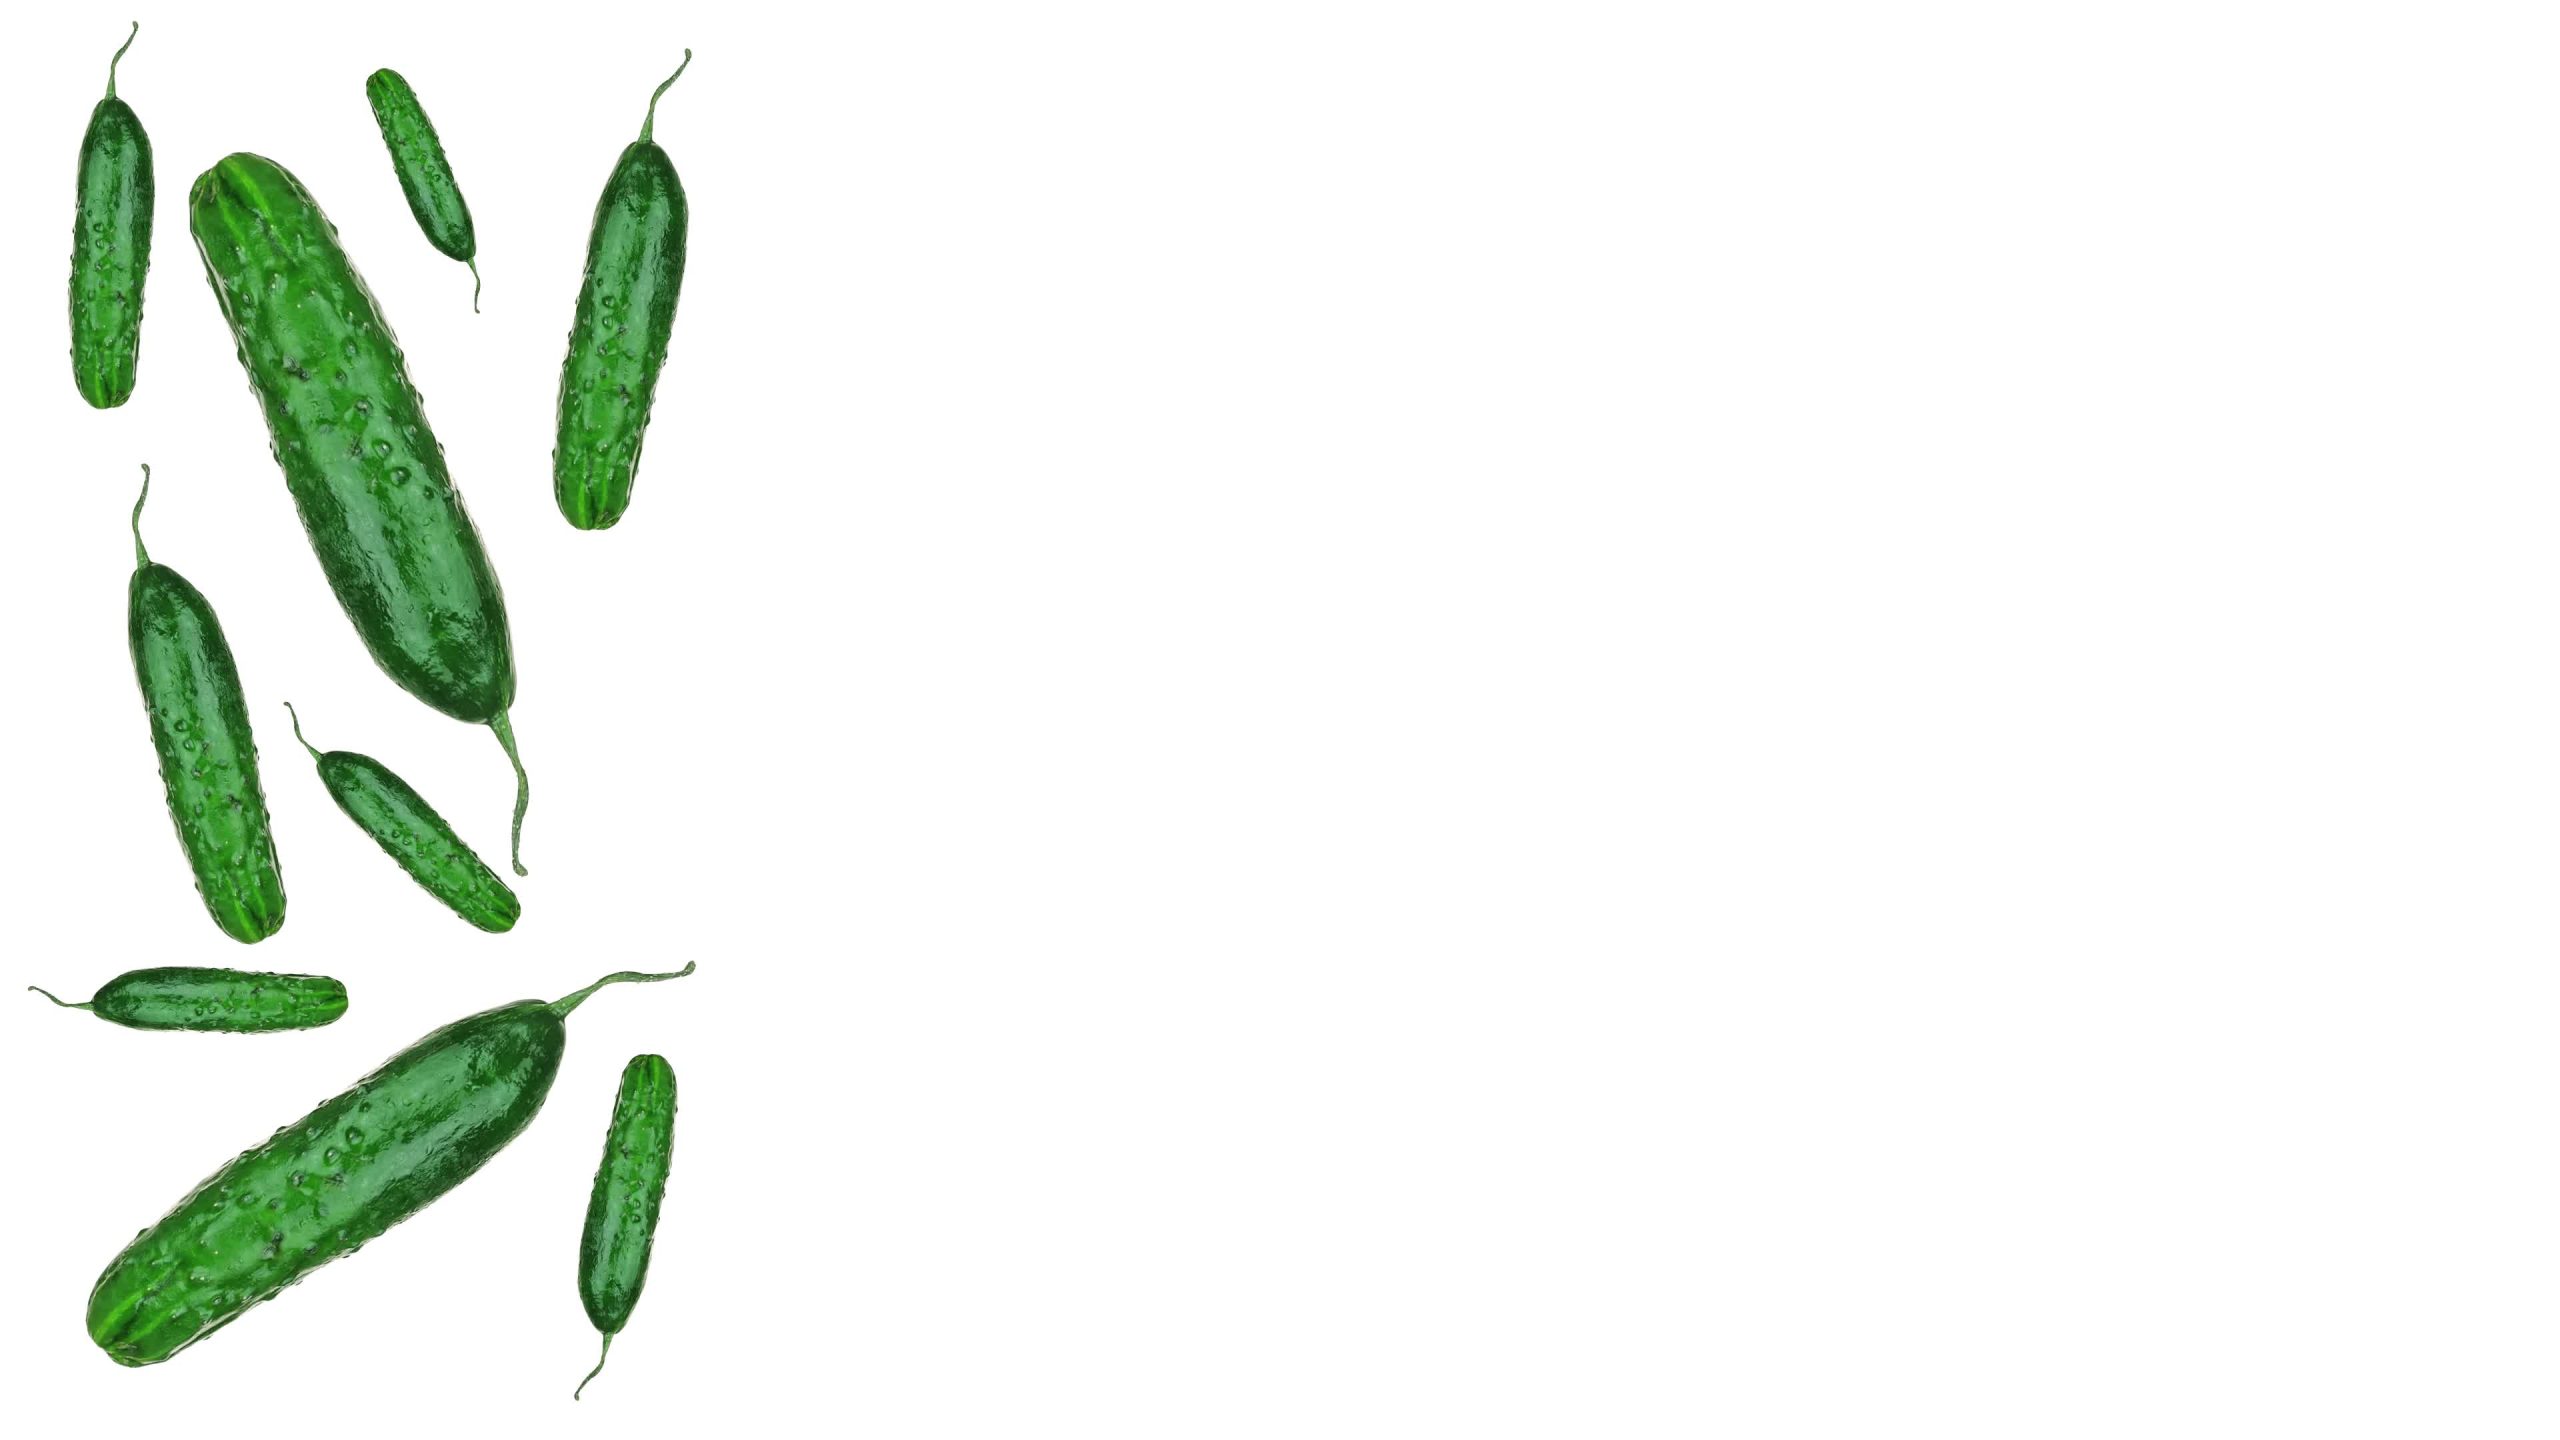 Green cucumbers on a white background with copy space